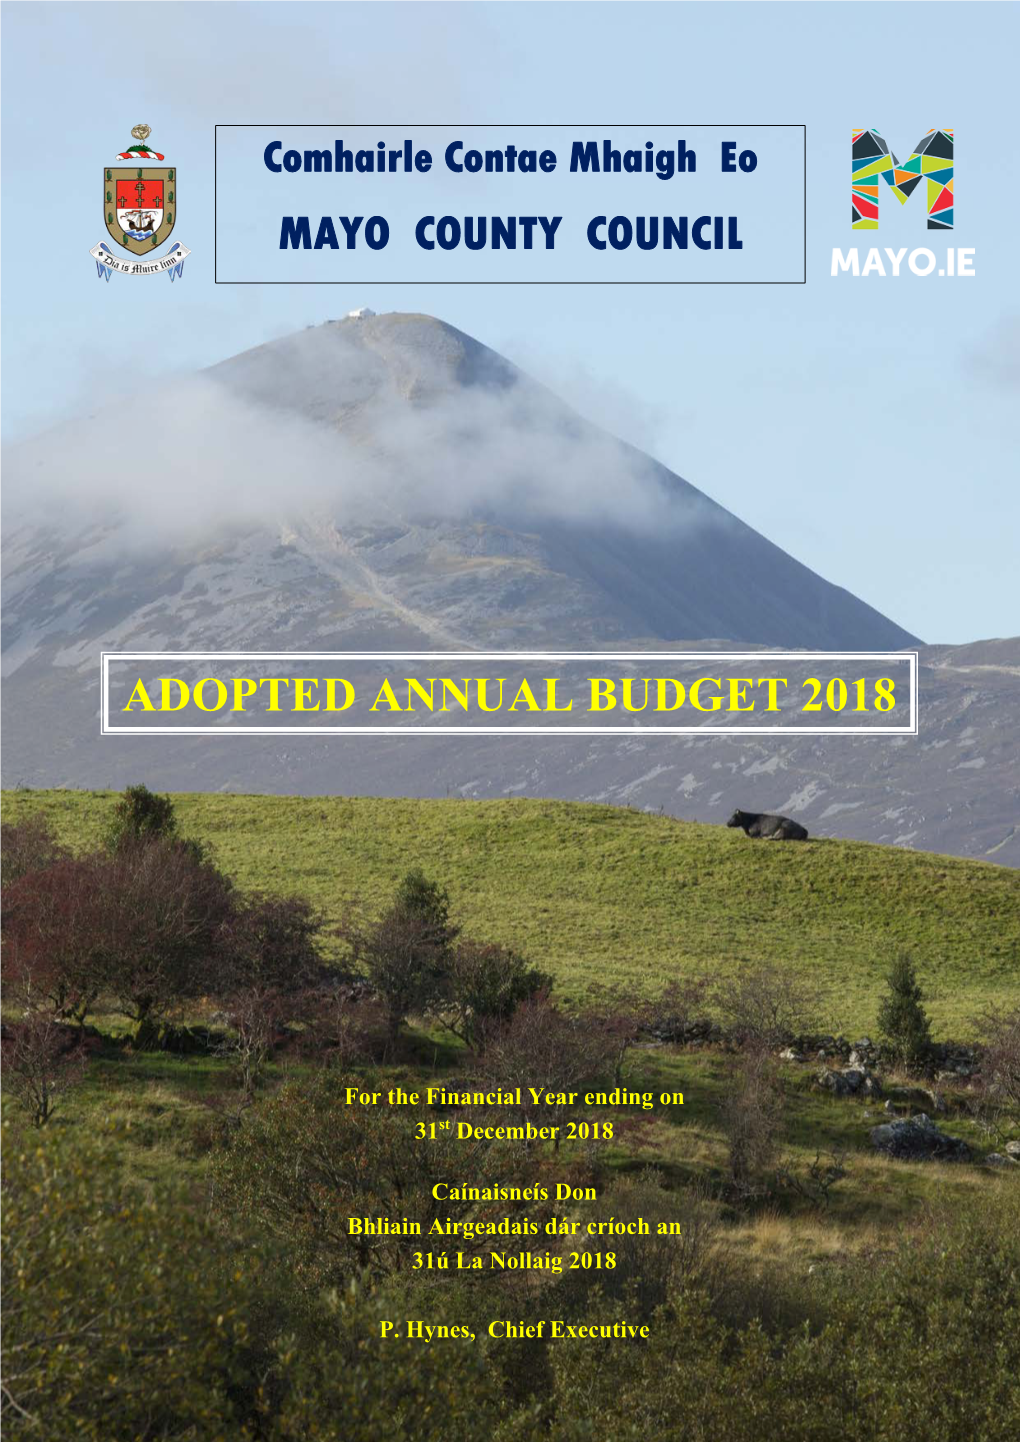 23/04/2020 Adopted Annual Budget 2018